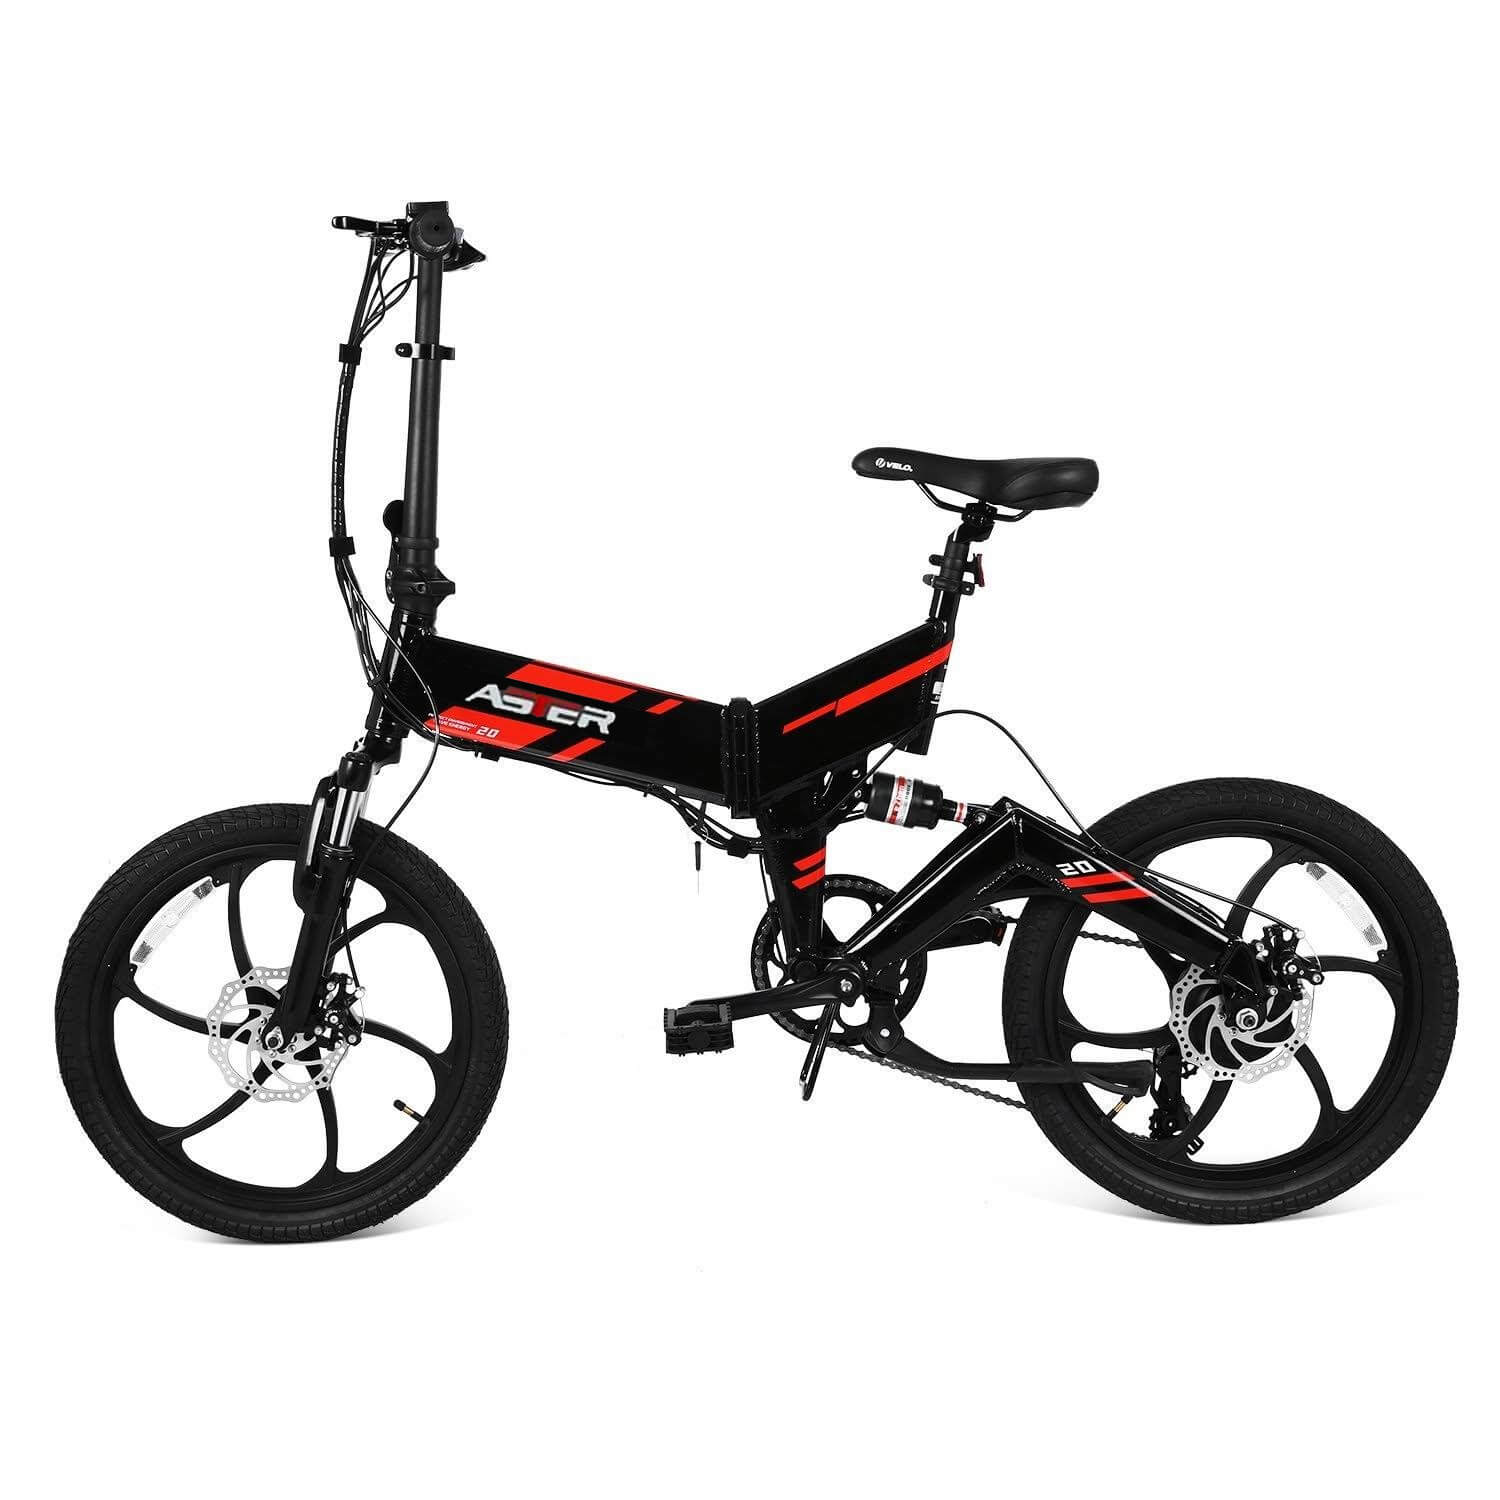 Foldable Aluminium Electric Bicycle With Pedal Assist 48 v